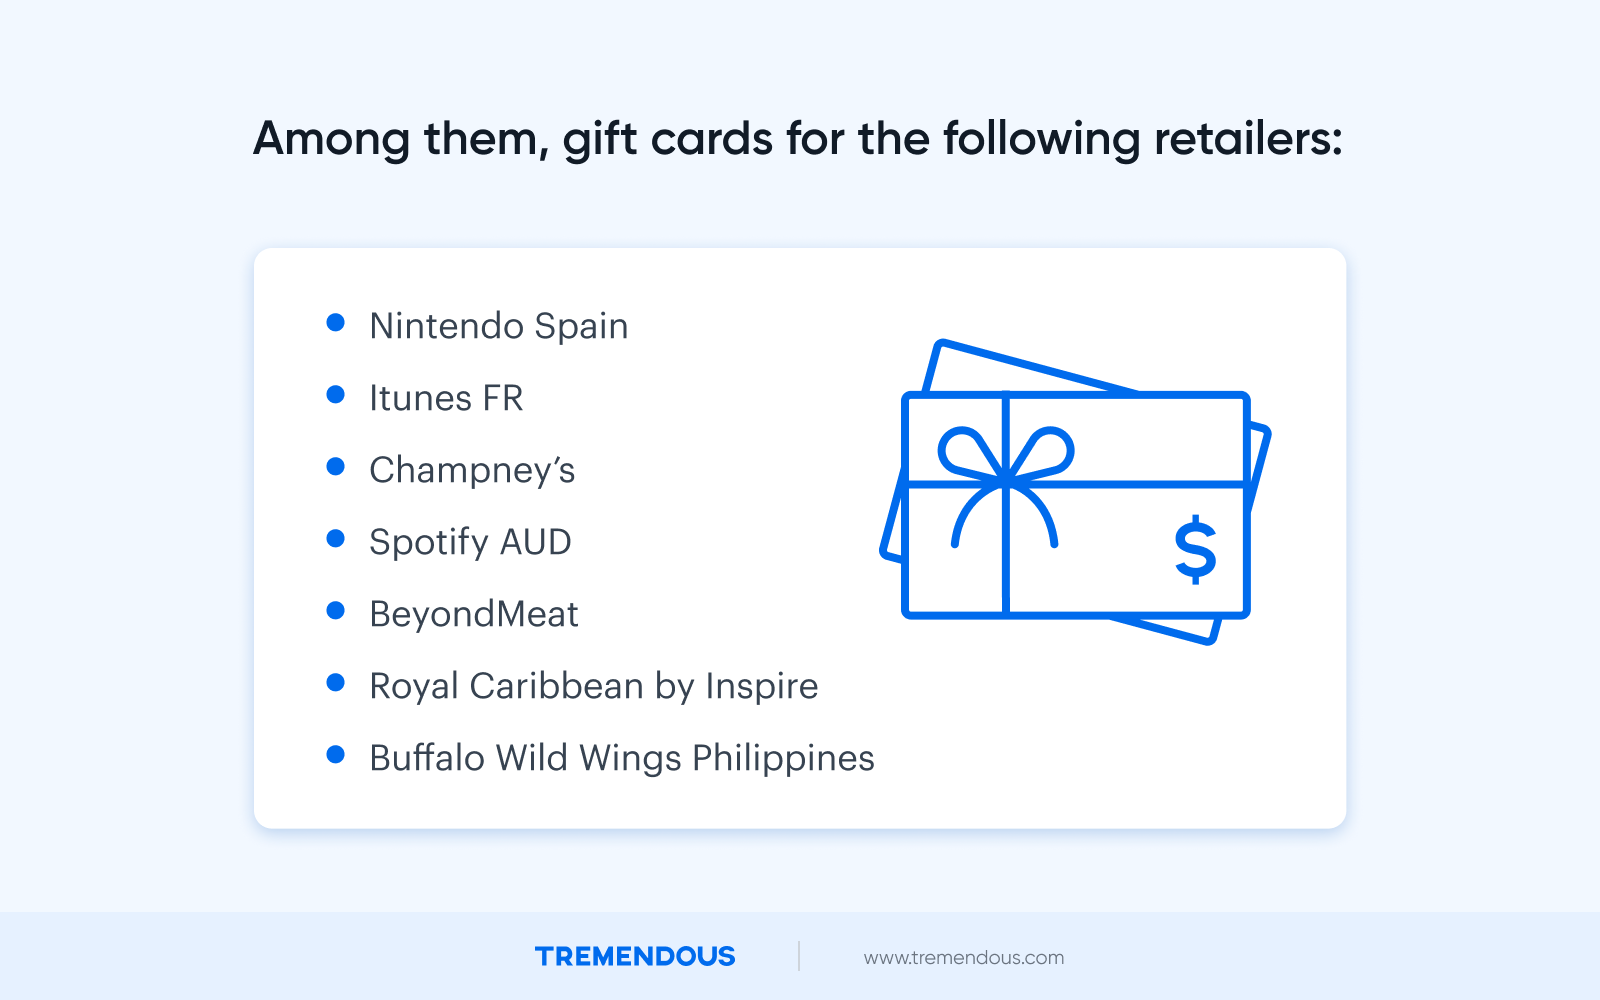 A list of the least popular gift cards redeemed, including: Nintendo Spain, Itunes FR, Champney's, Spotify AUD, BeyondMeat, Royal Caribbean by Inspire, and Buffalo Wild Wings Philippines.